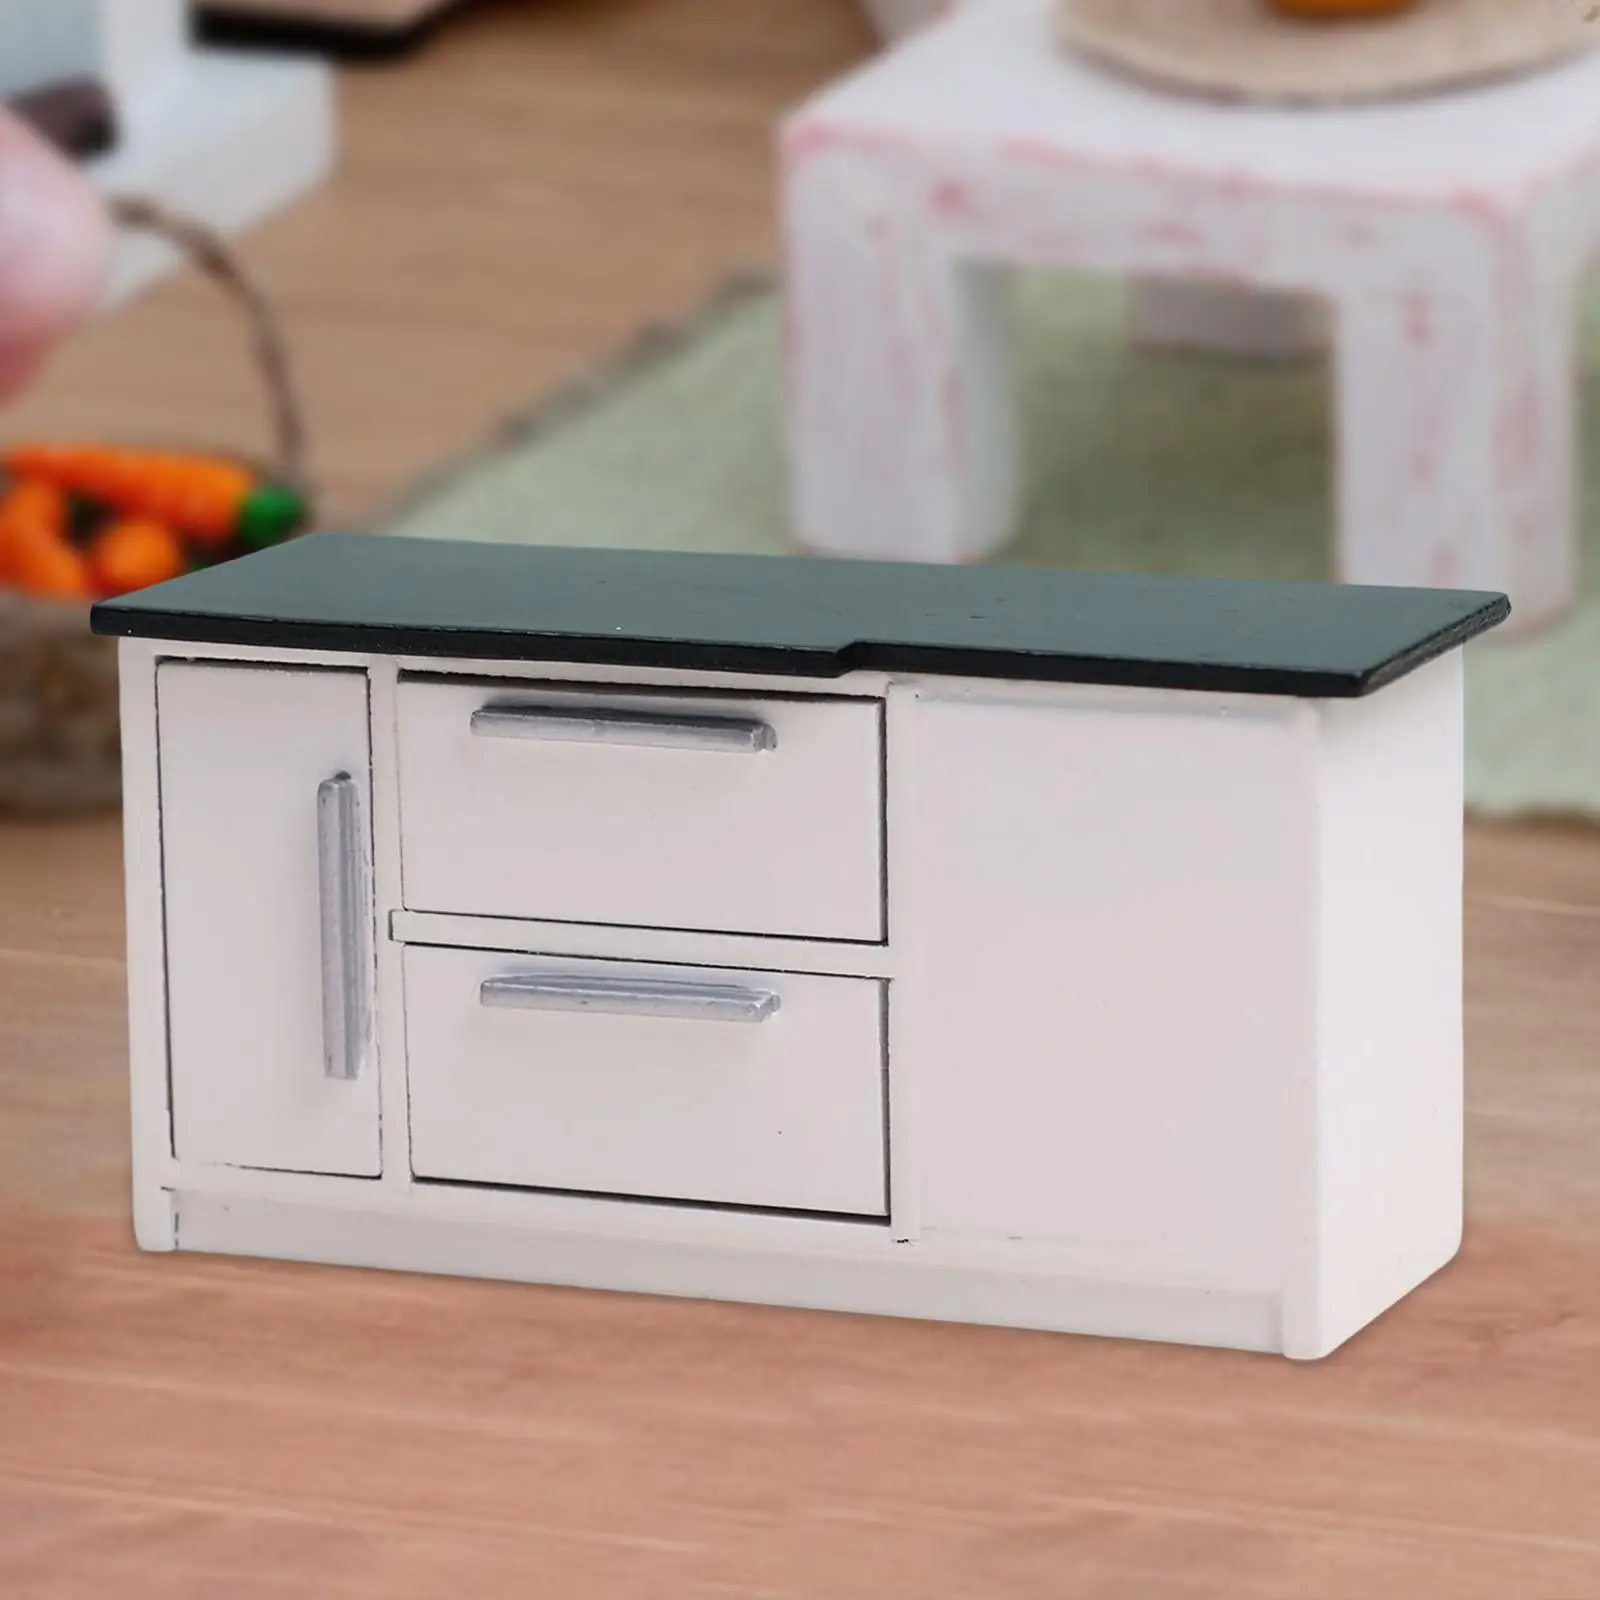 Dollhouse Kitchen Sink Dollhouse Cupboard for Photography Props Pretend Play Children